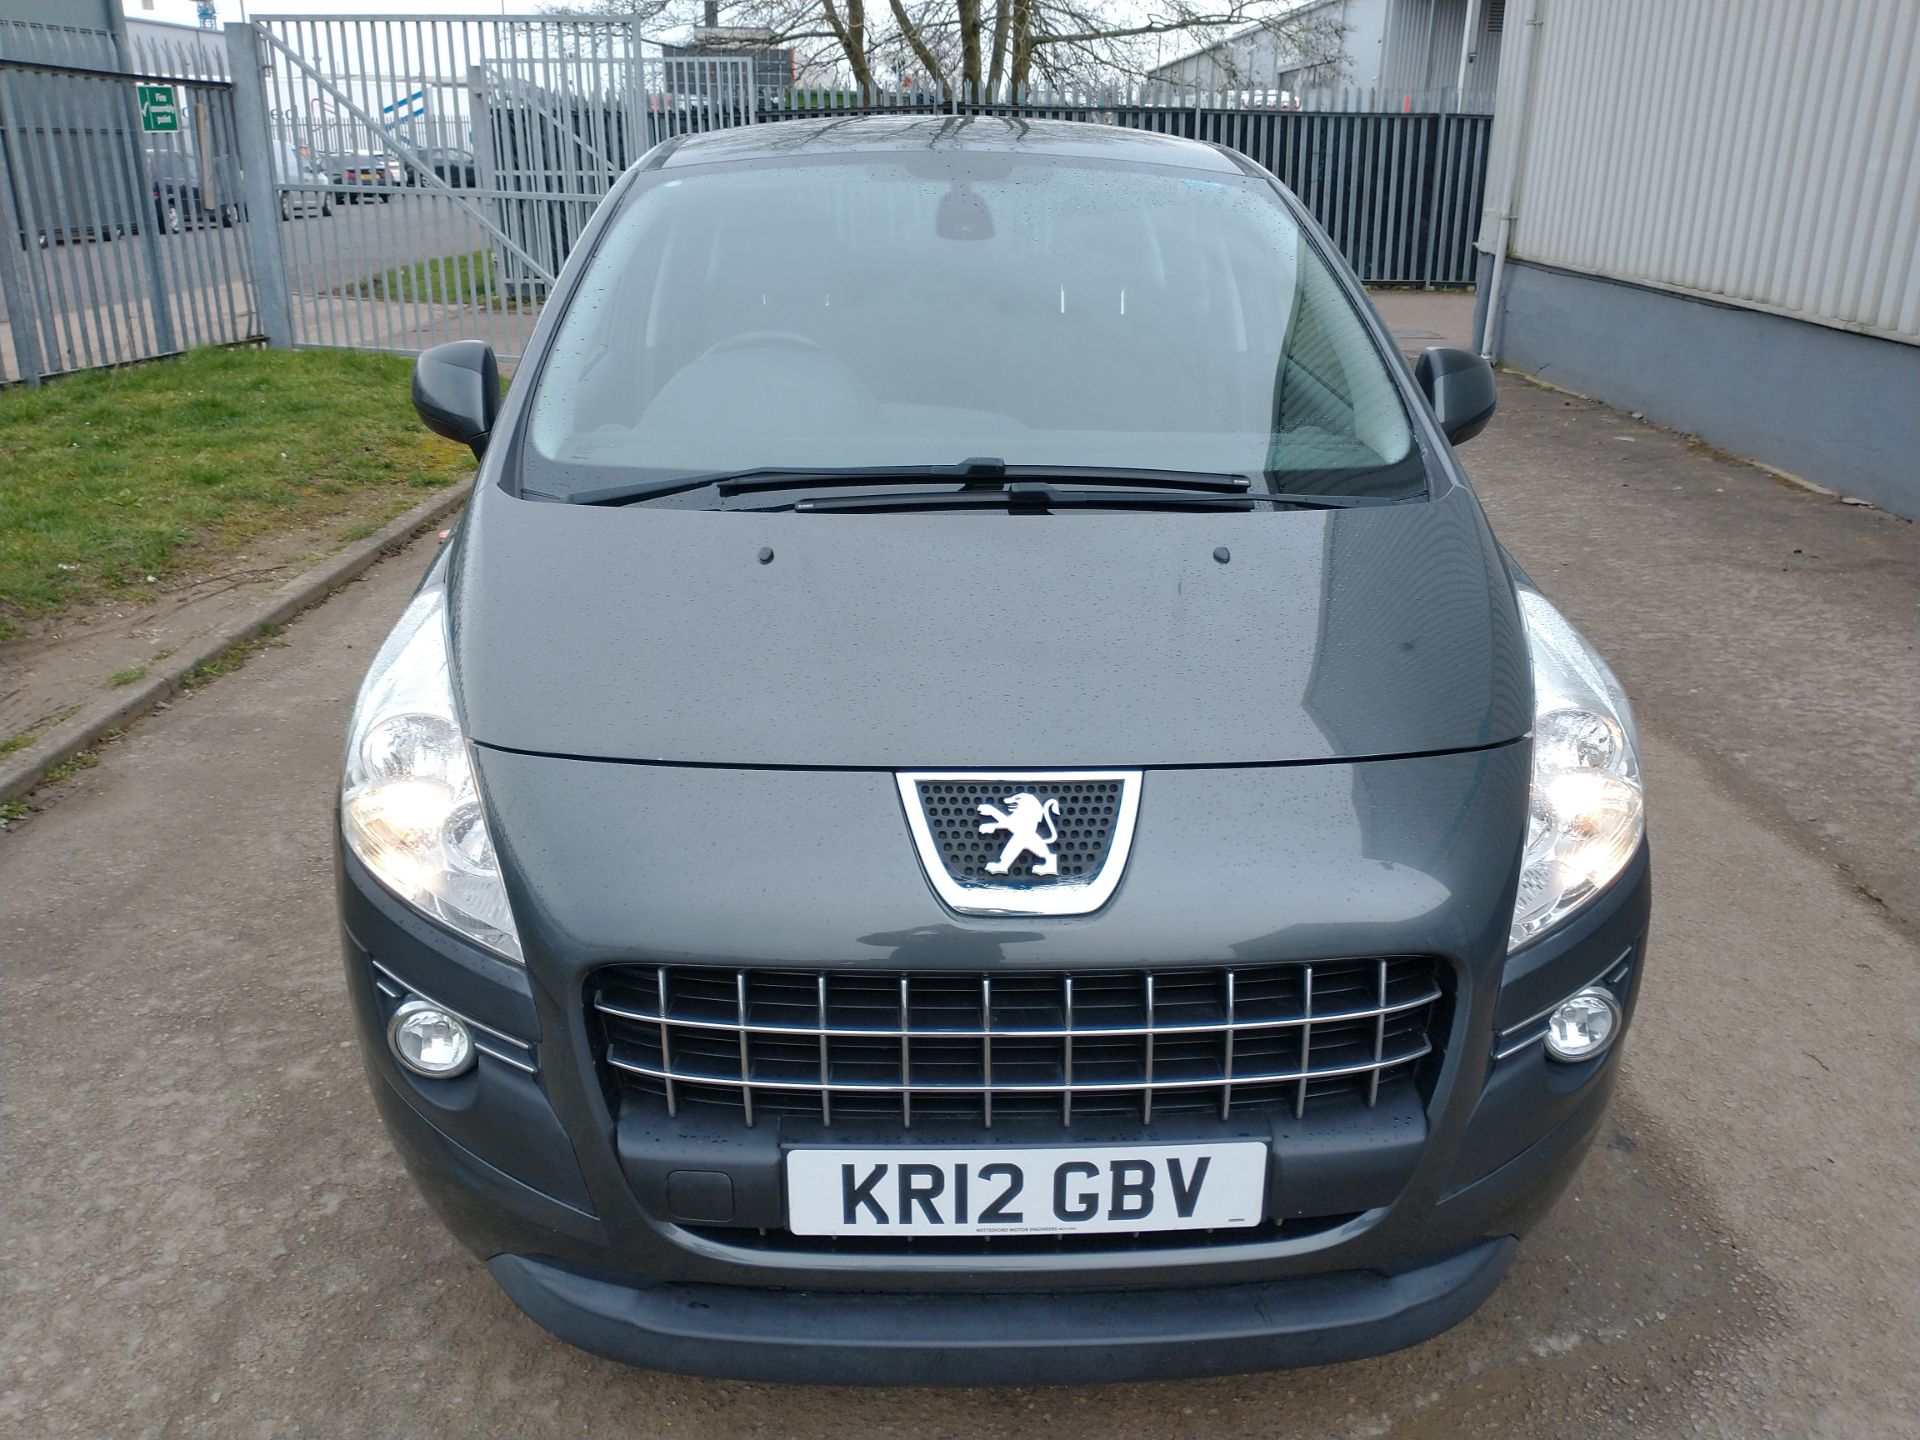 2012 Peugeot 3008 Active HDI 1.6 5DR SUV - CL505 - NO VAT ON THE HAMM - Image 19 of 19